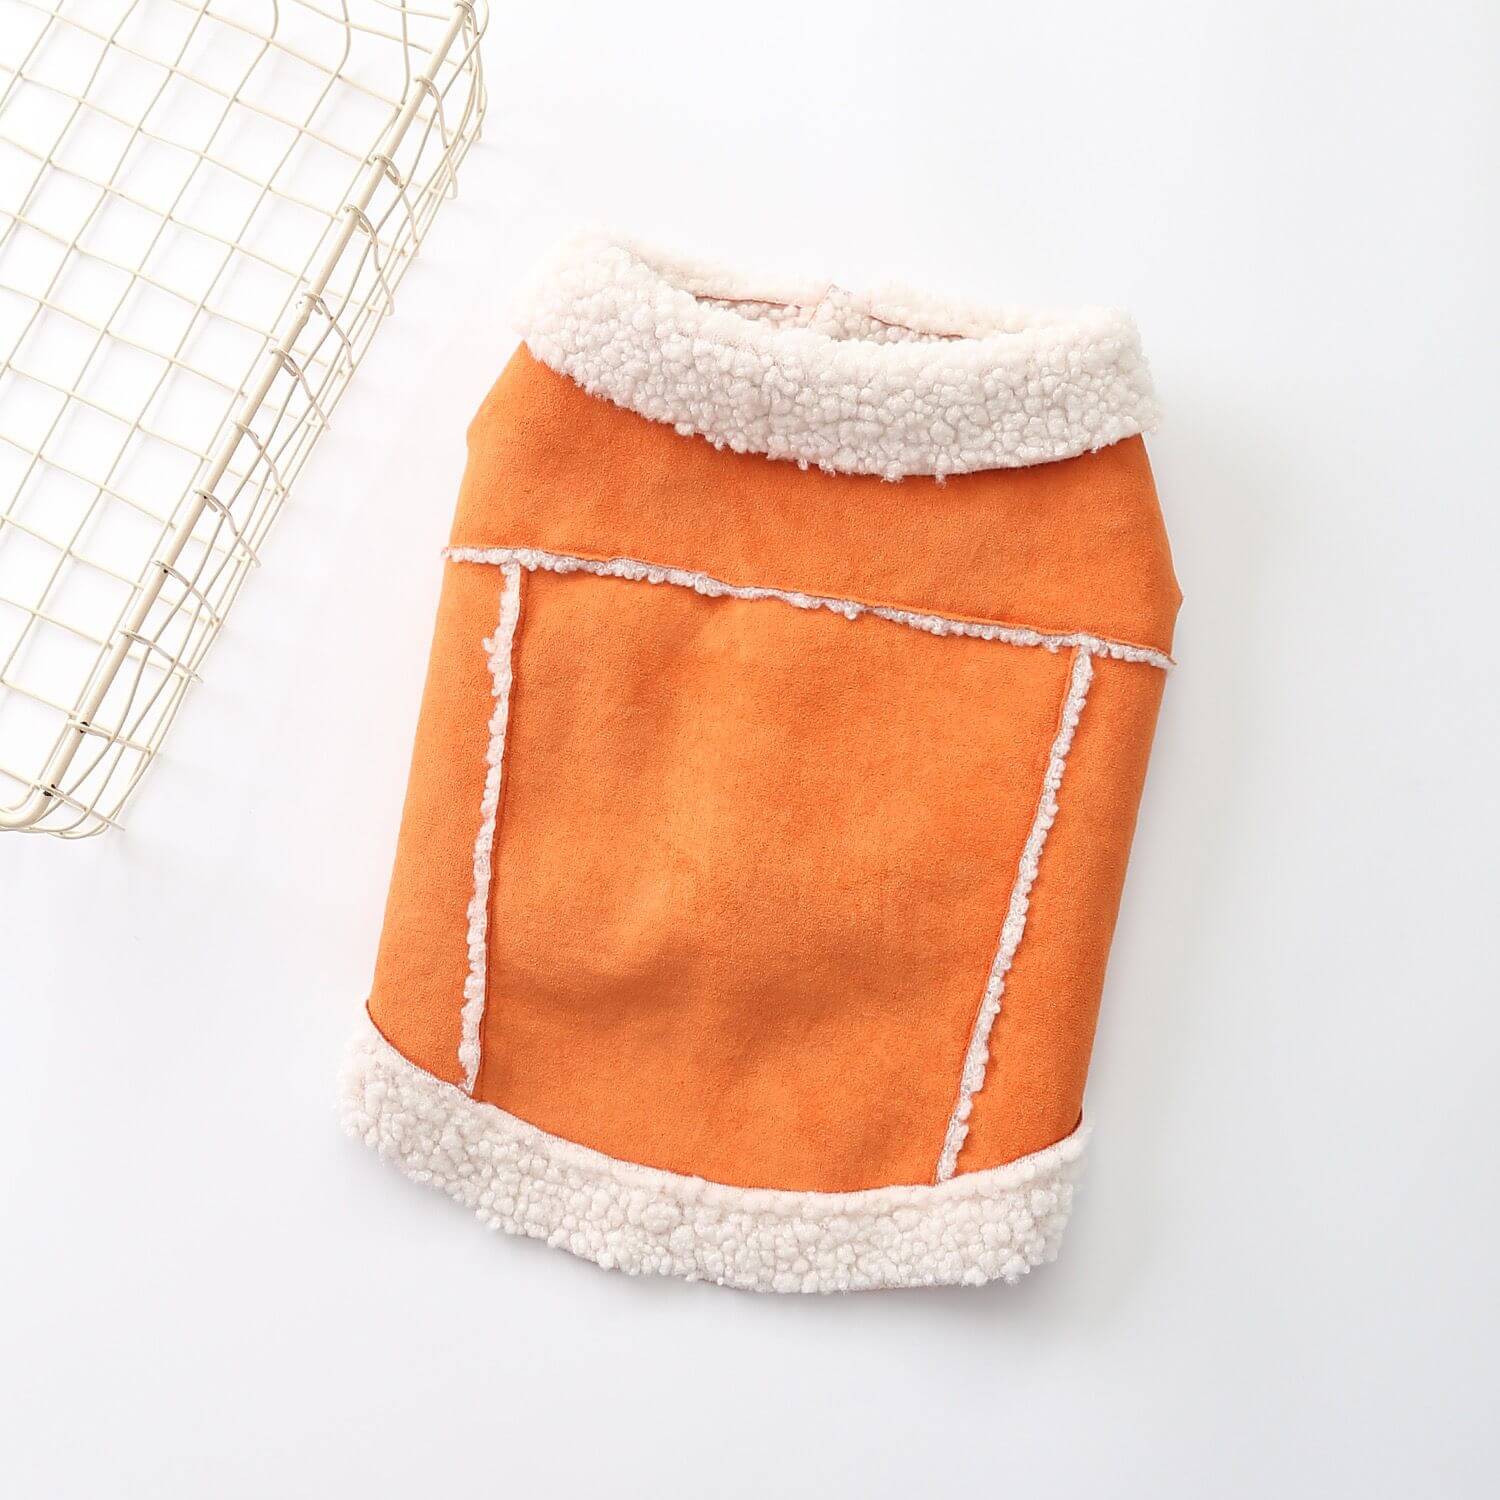 dog winter suede jacket coat for small medium dog breeds by Frenchiely 